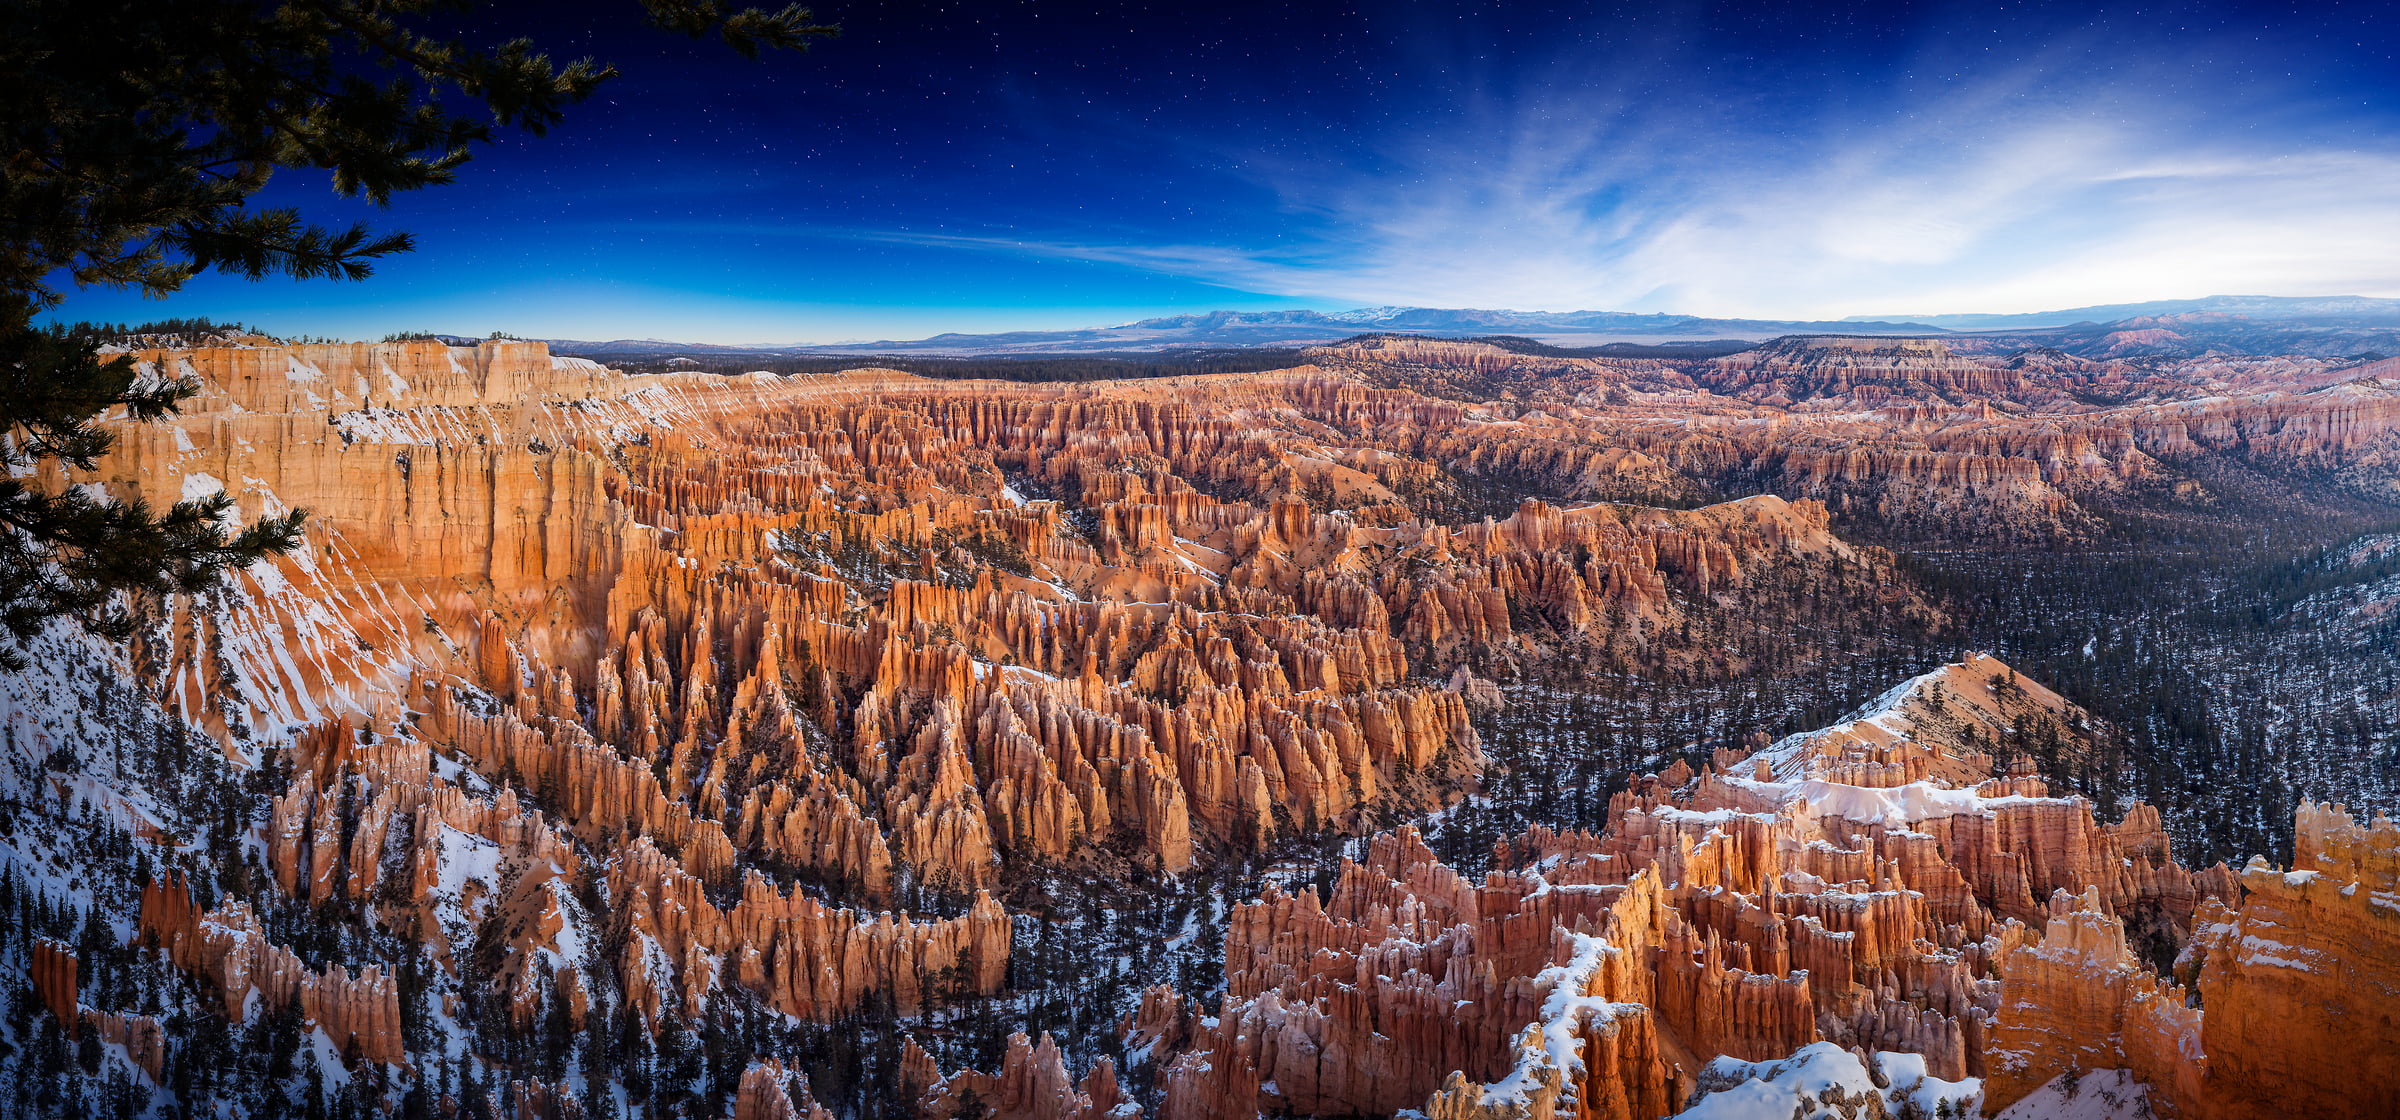 236 megapixels! A very high resolution, large-format VAST photo of Bryce Canyon; fine art landscape photograph created by Nick Pedersen in Bryce Canyon National Park, Utah